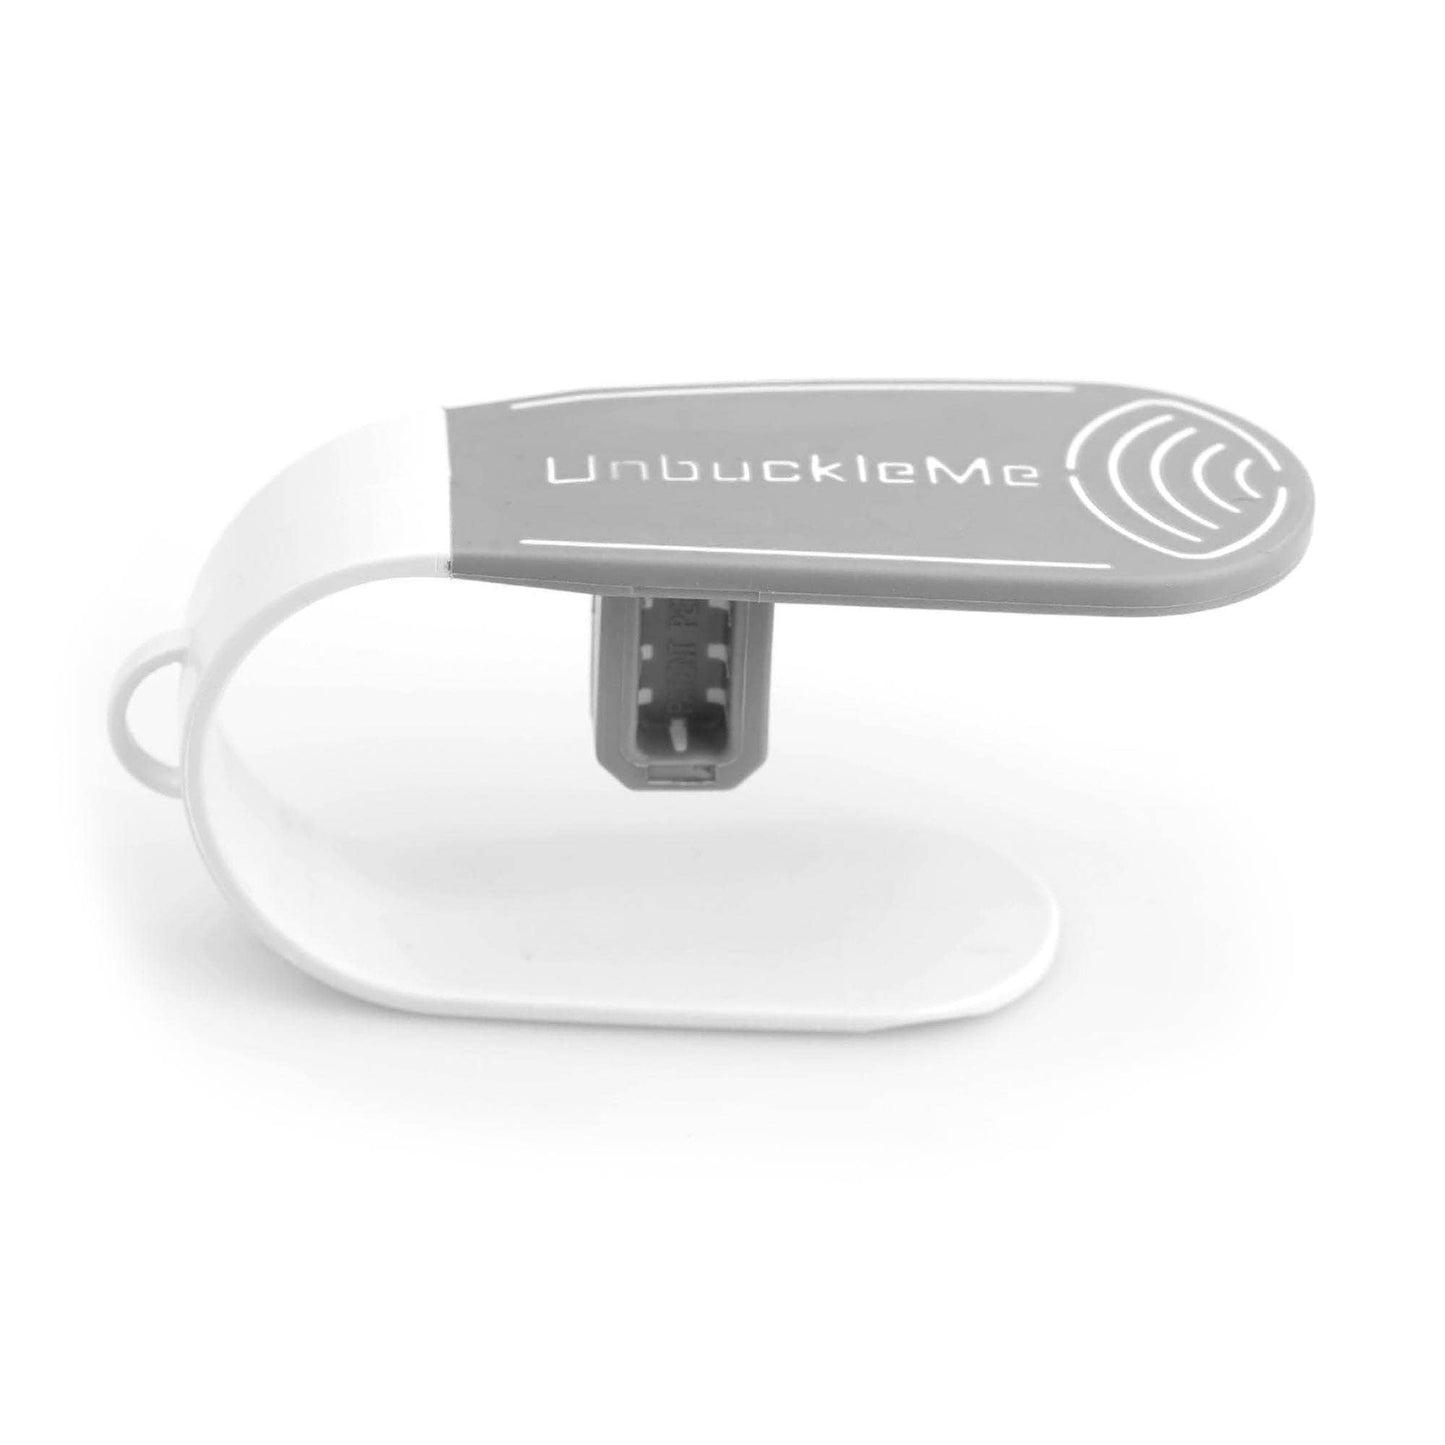 UnbuckleMe Car Seat Buckle Release Tool - Gray and White UnbuckleMe